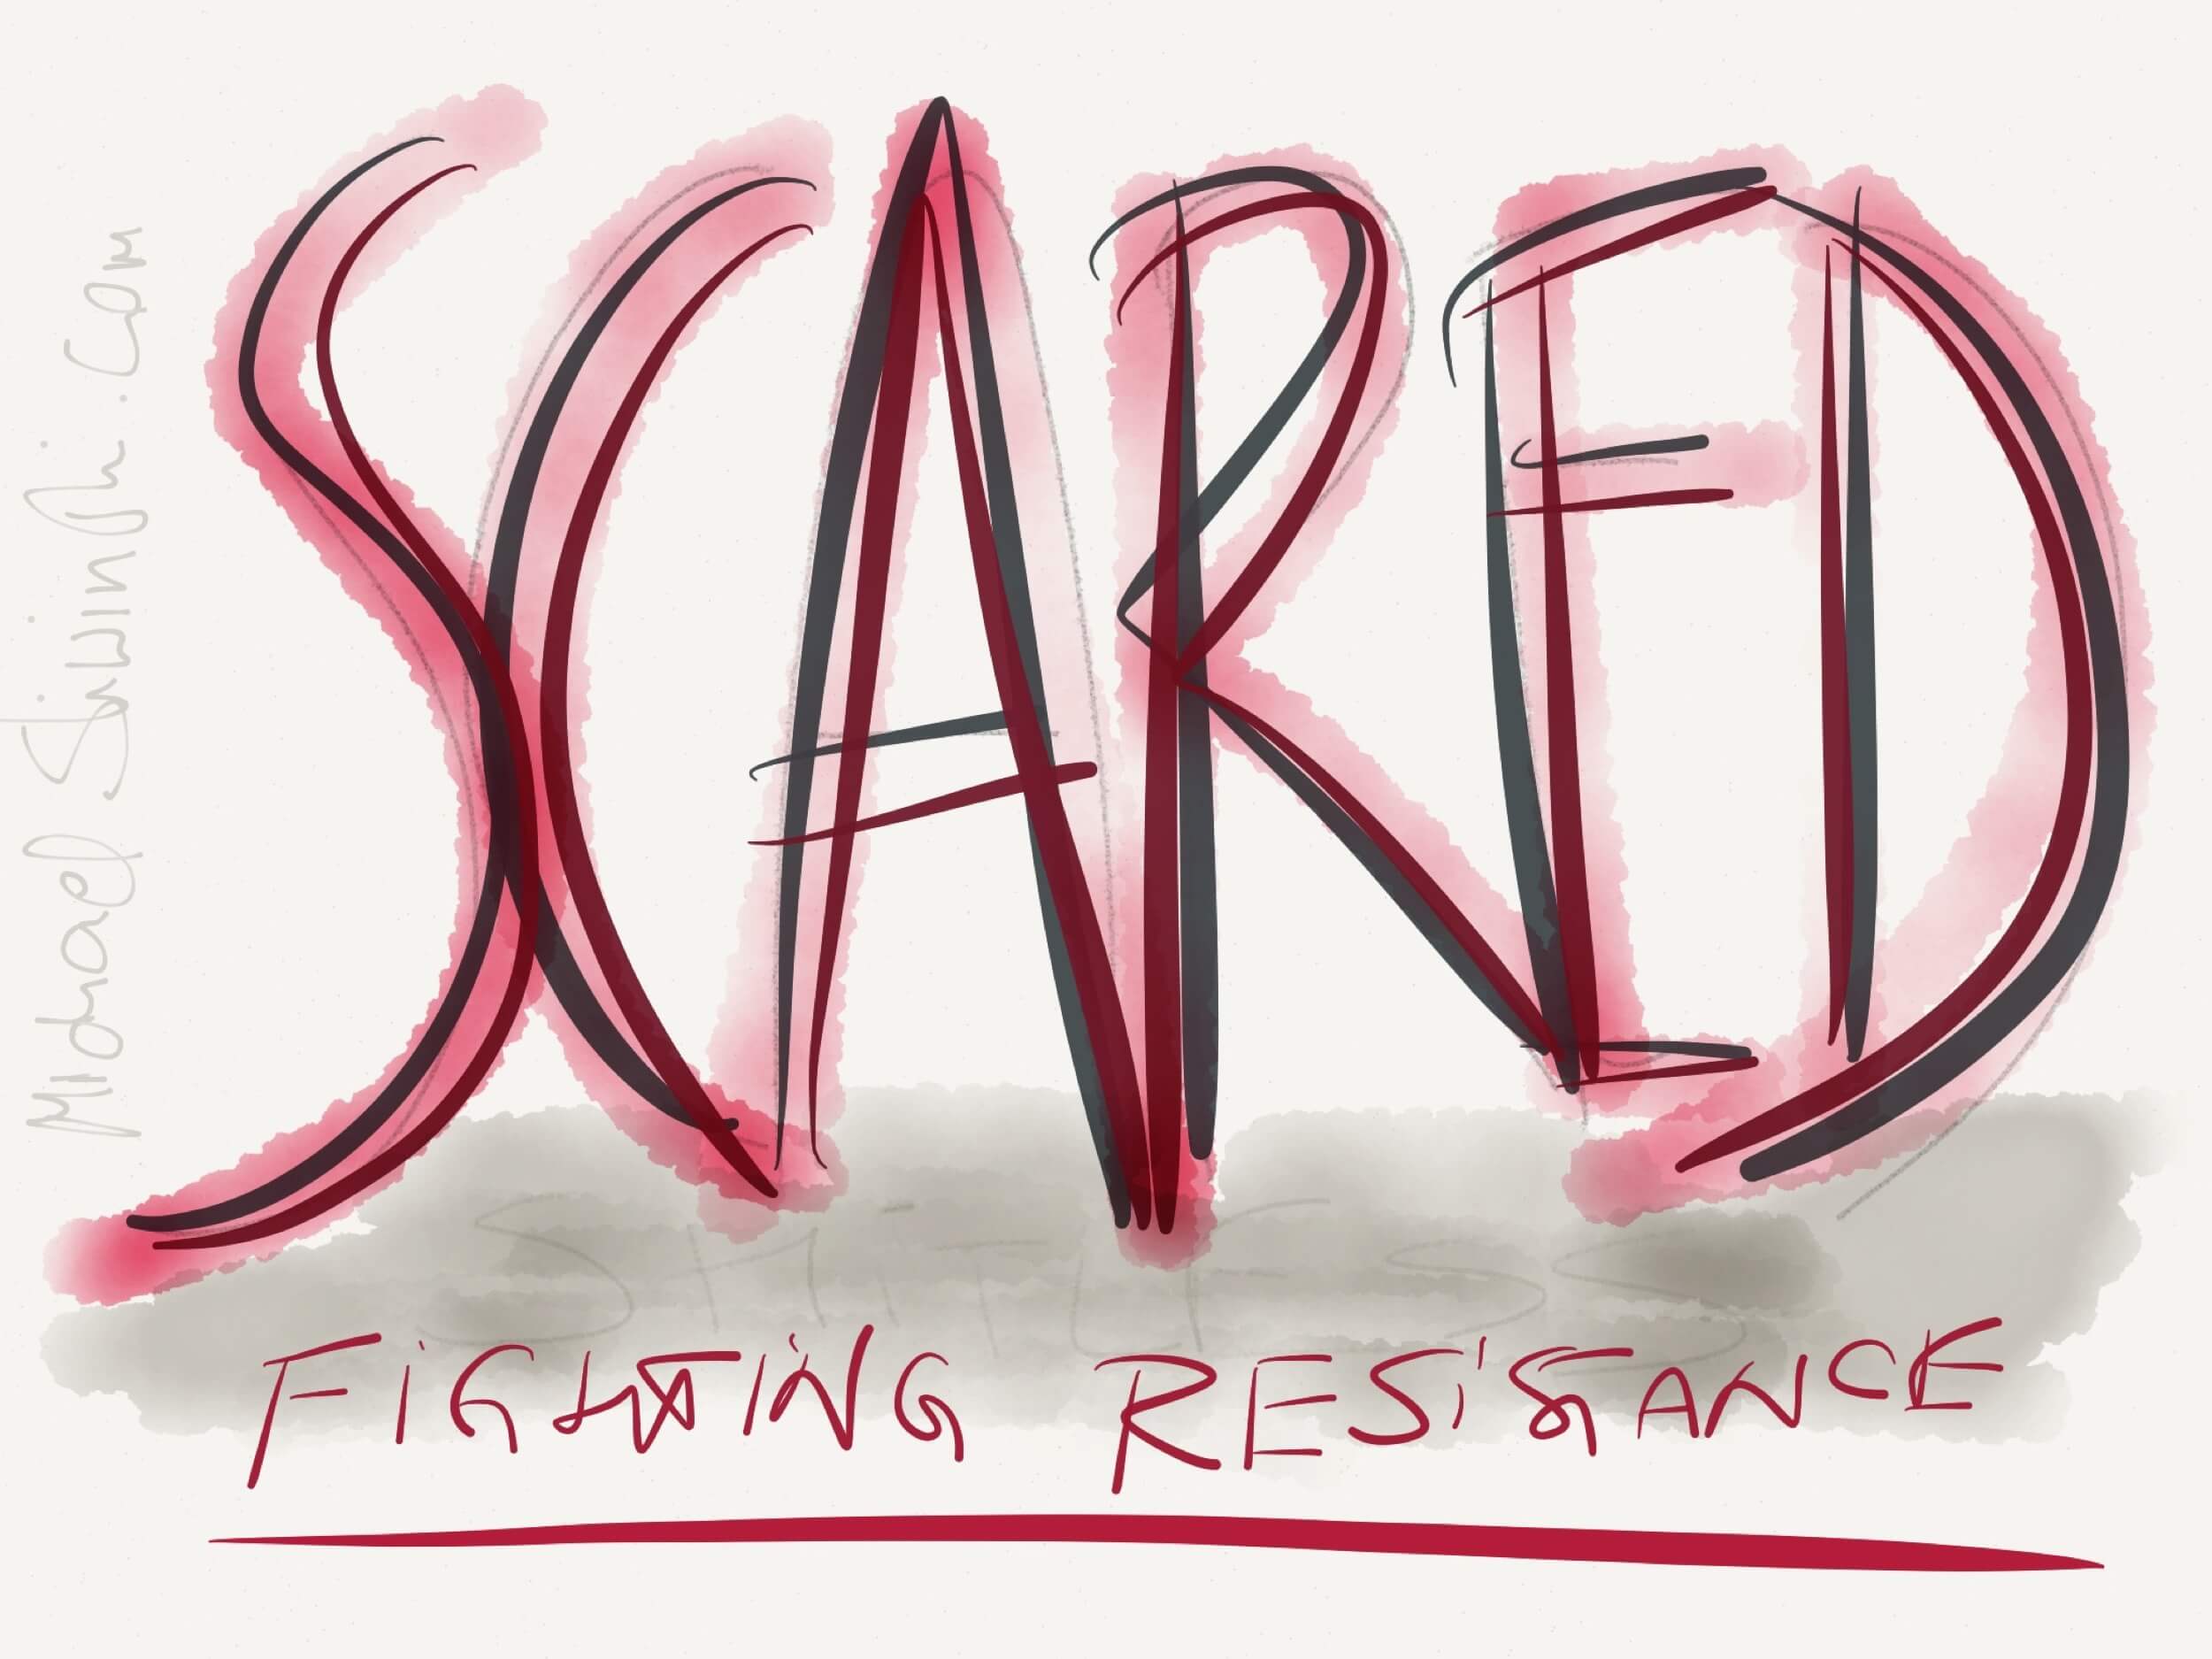 Fighting resistance when being scared